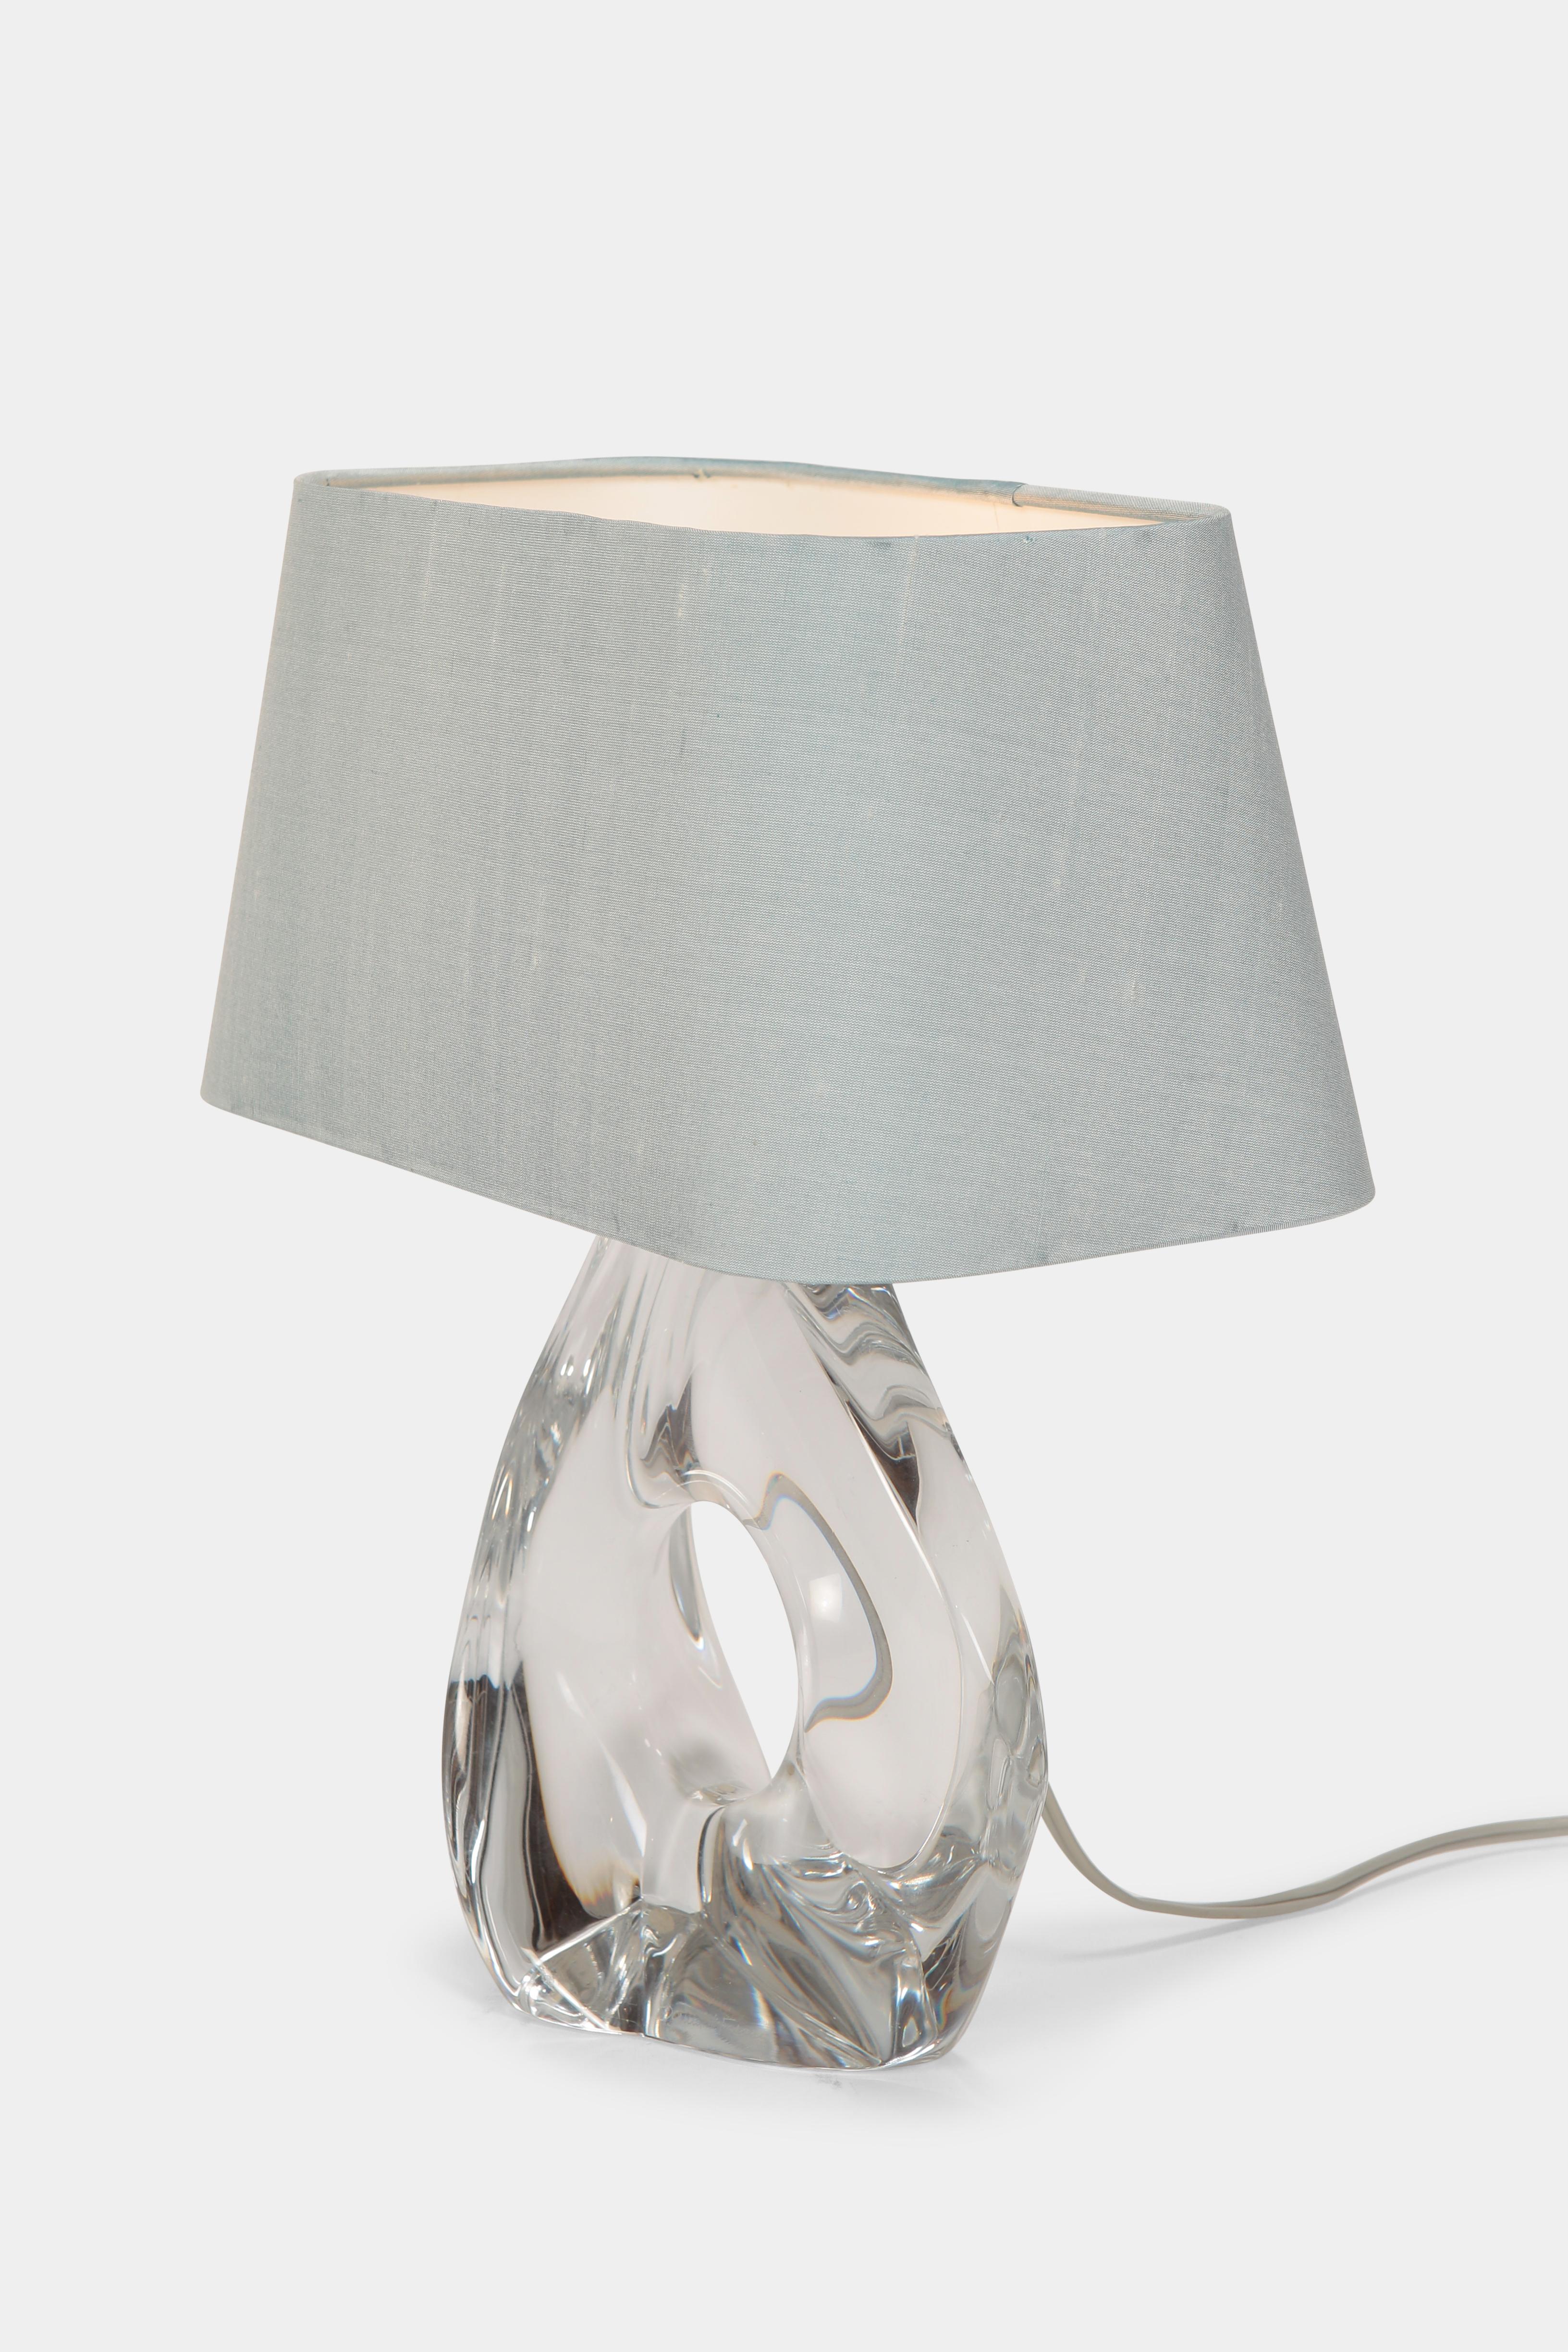 French Jean Daum Crystal Table Lamp, 1960s For Sale